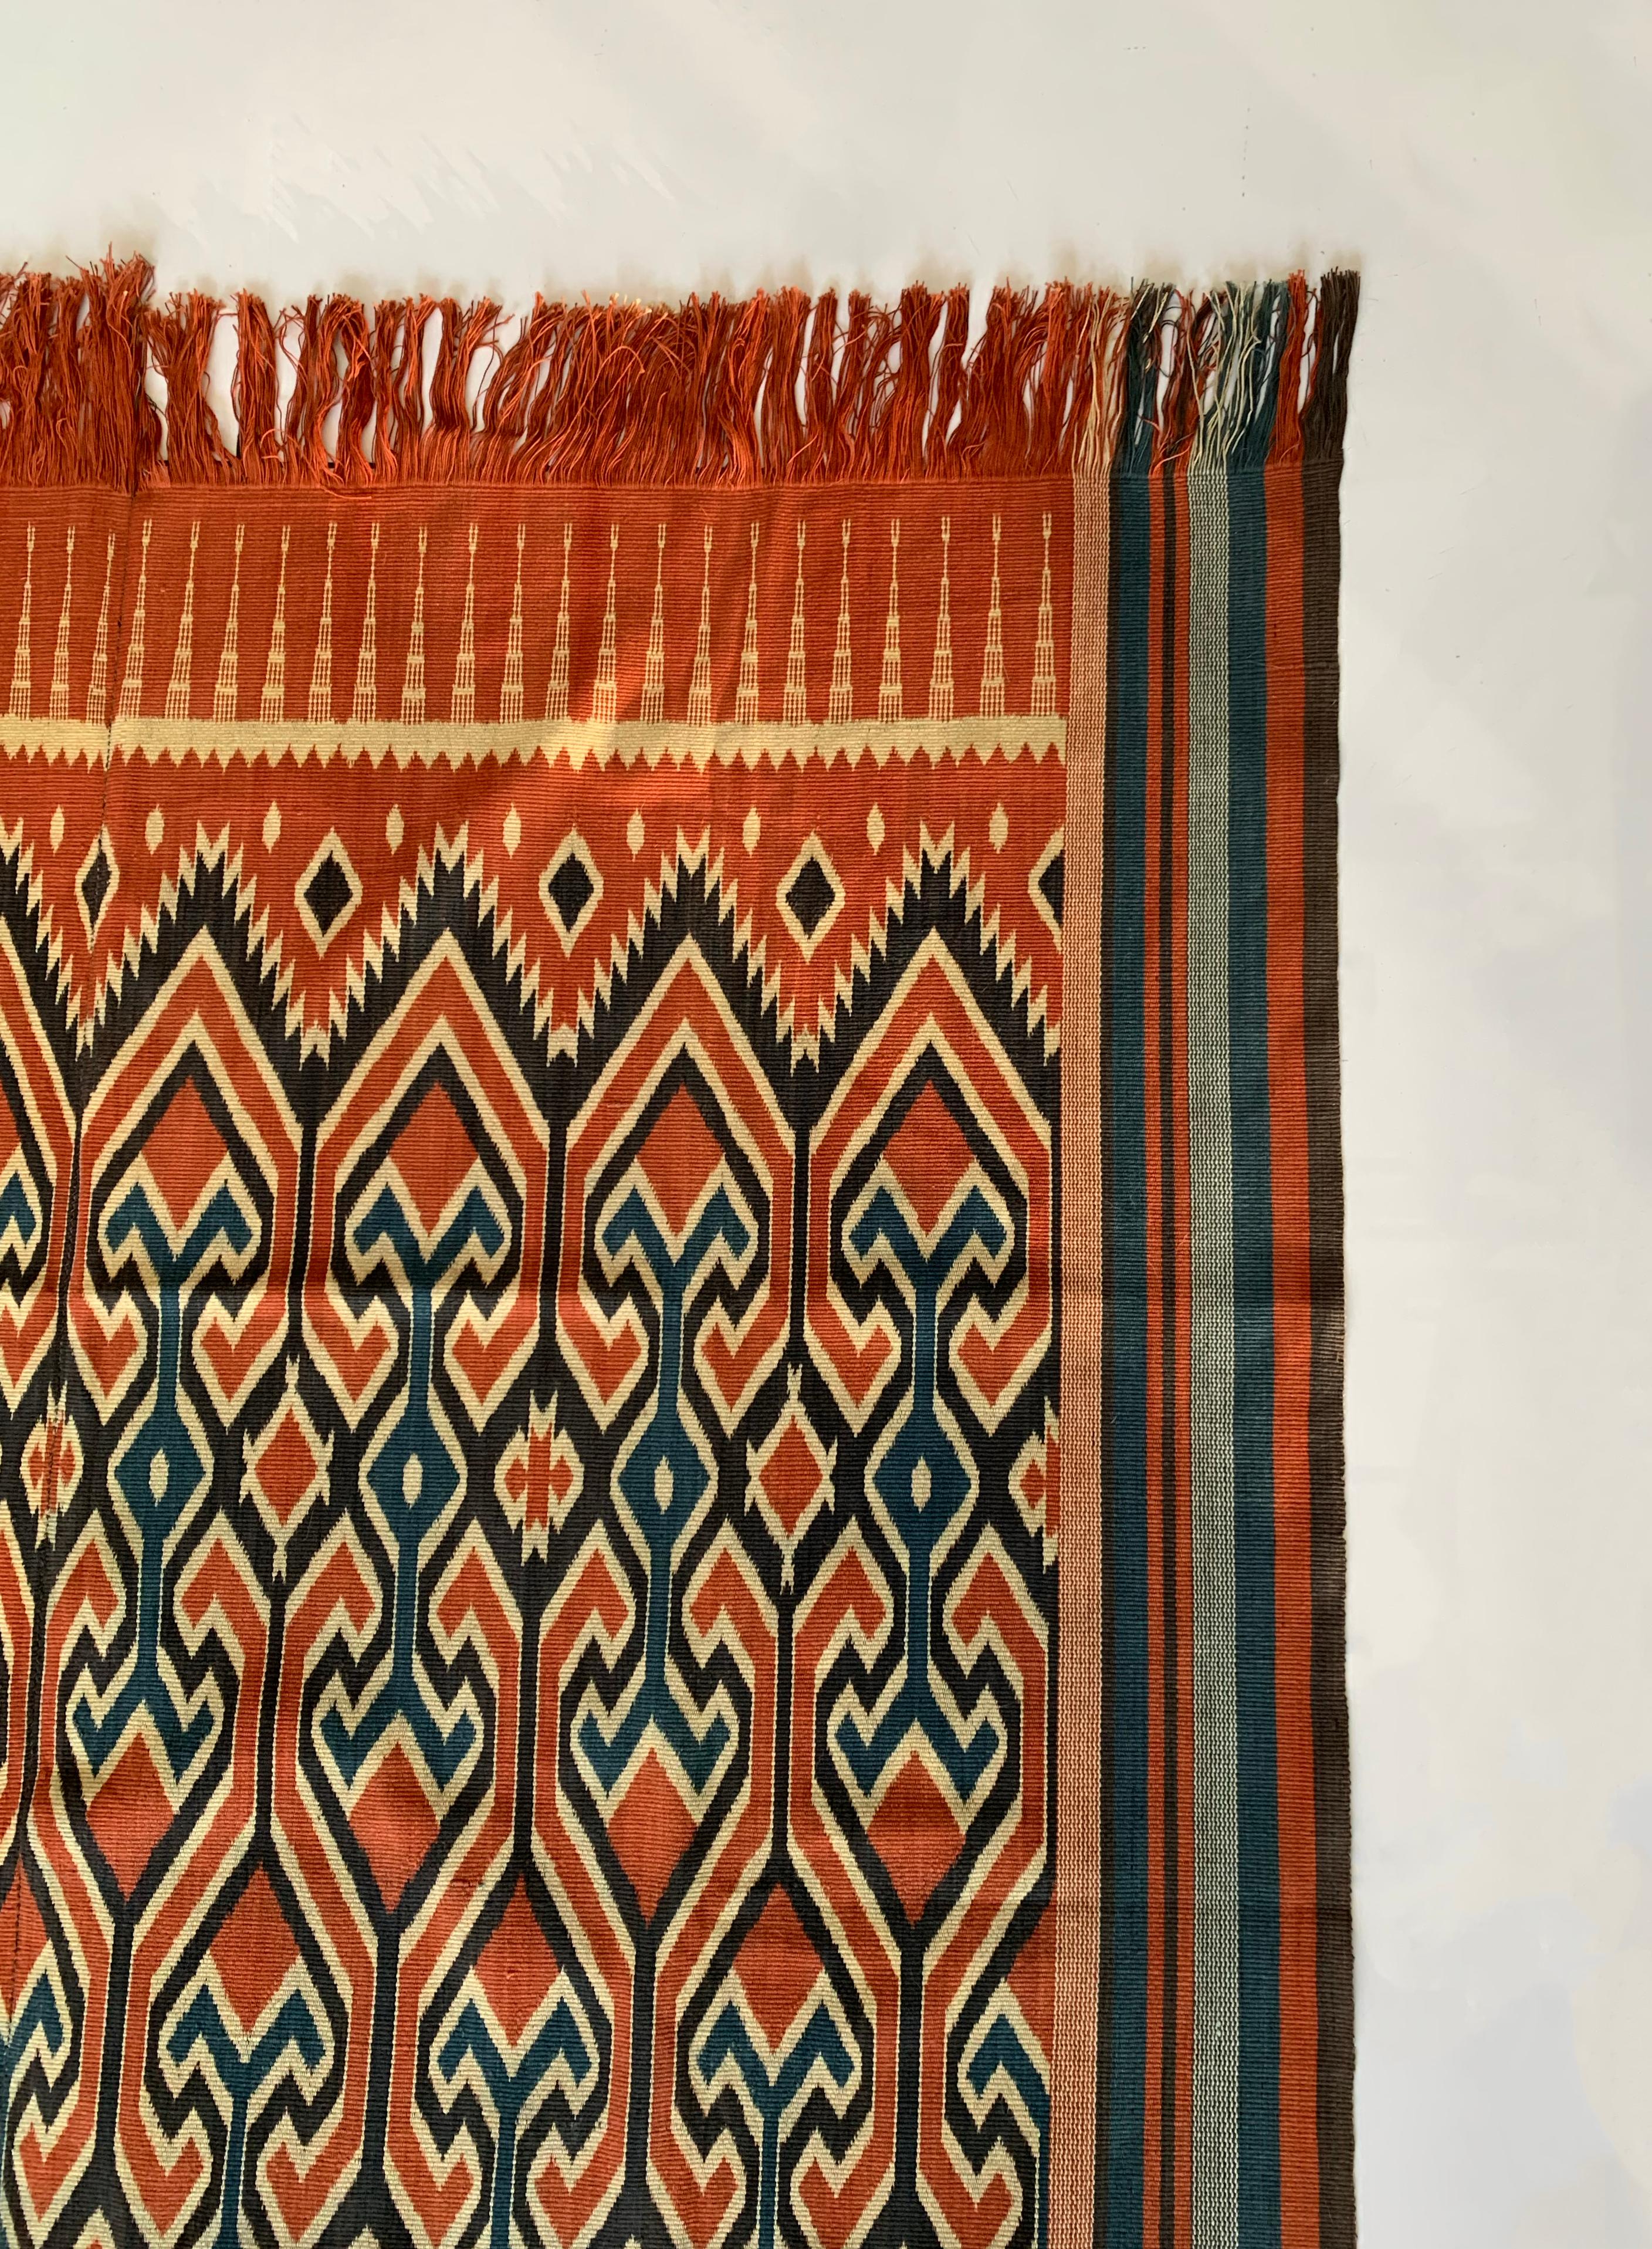 Other Ikat Textile from Toraja Tribe of Sulawesi with Stunning Tribal Motifs